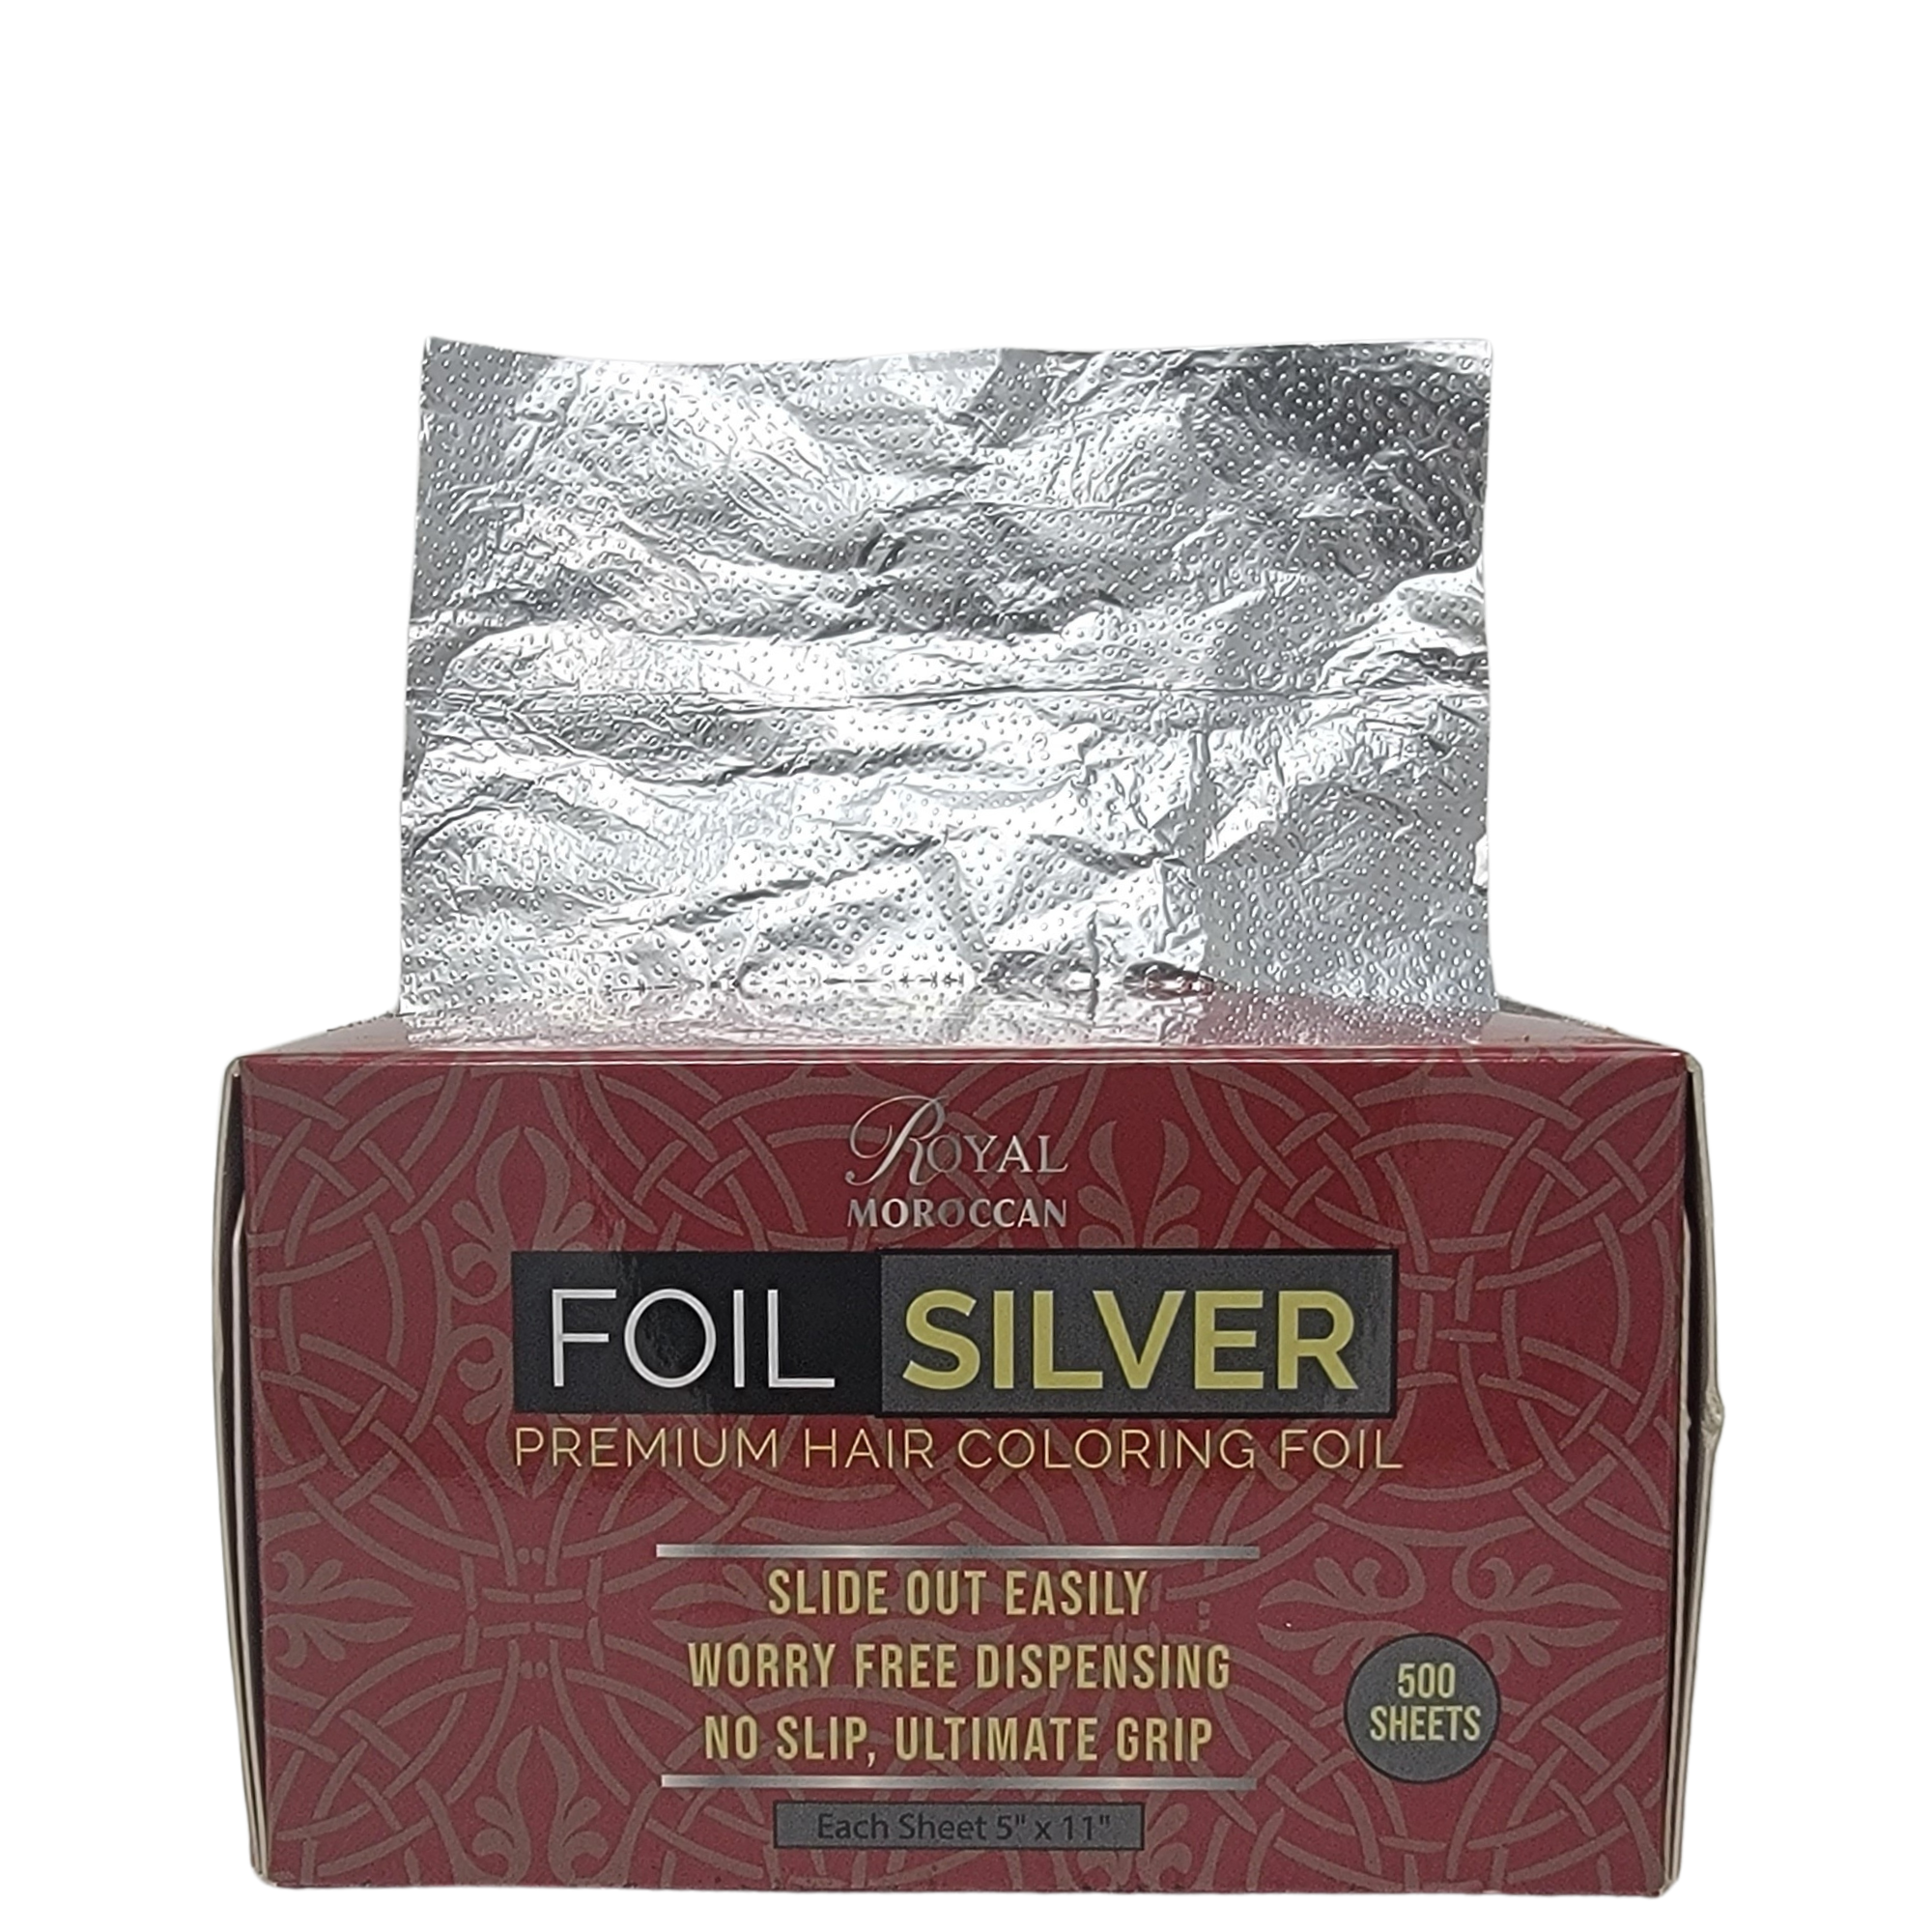  Colortrak Embossed Sheets Silver Aluminum Foil Pop-up  Dispenser, 500 Pre-cut Sheets Non-slip Textured Silver 5 x 11 Sheets for Hair  Foil Coloring and Highlighting Sheet Applications : Beauty & Personal